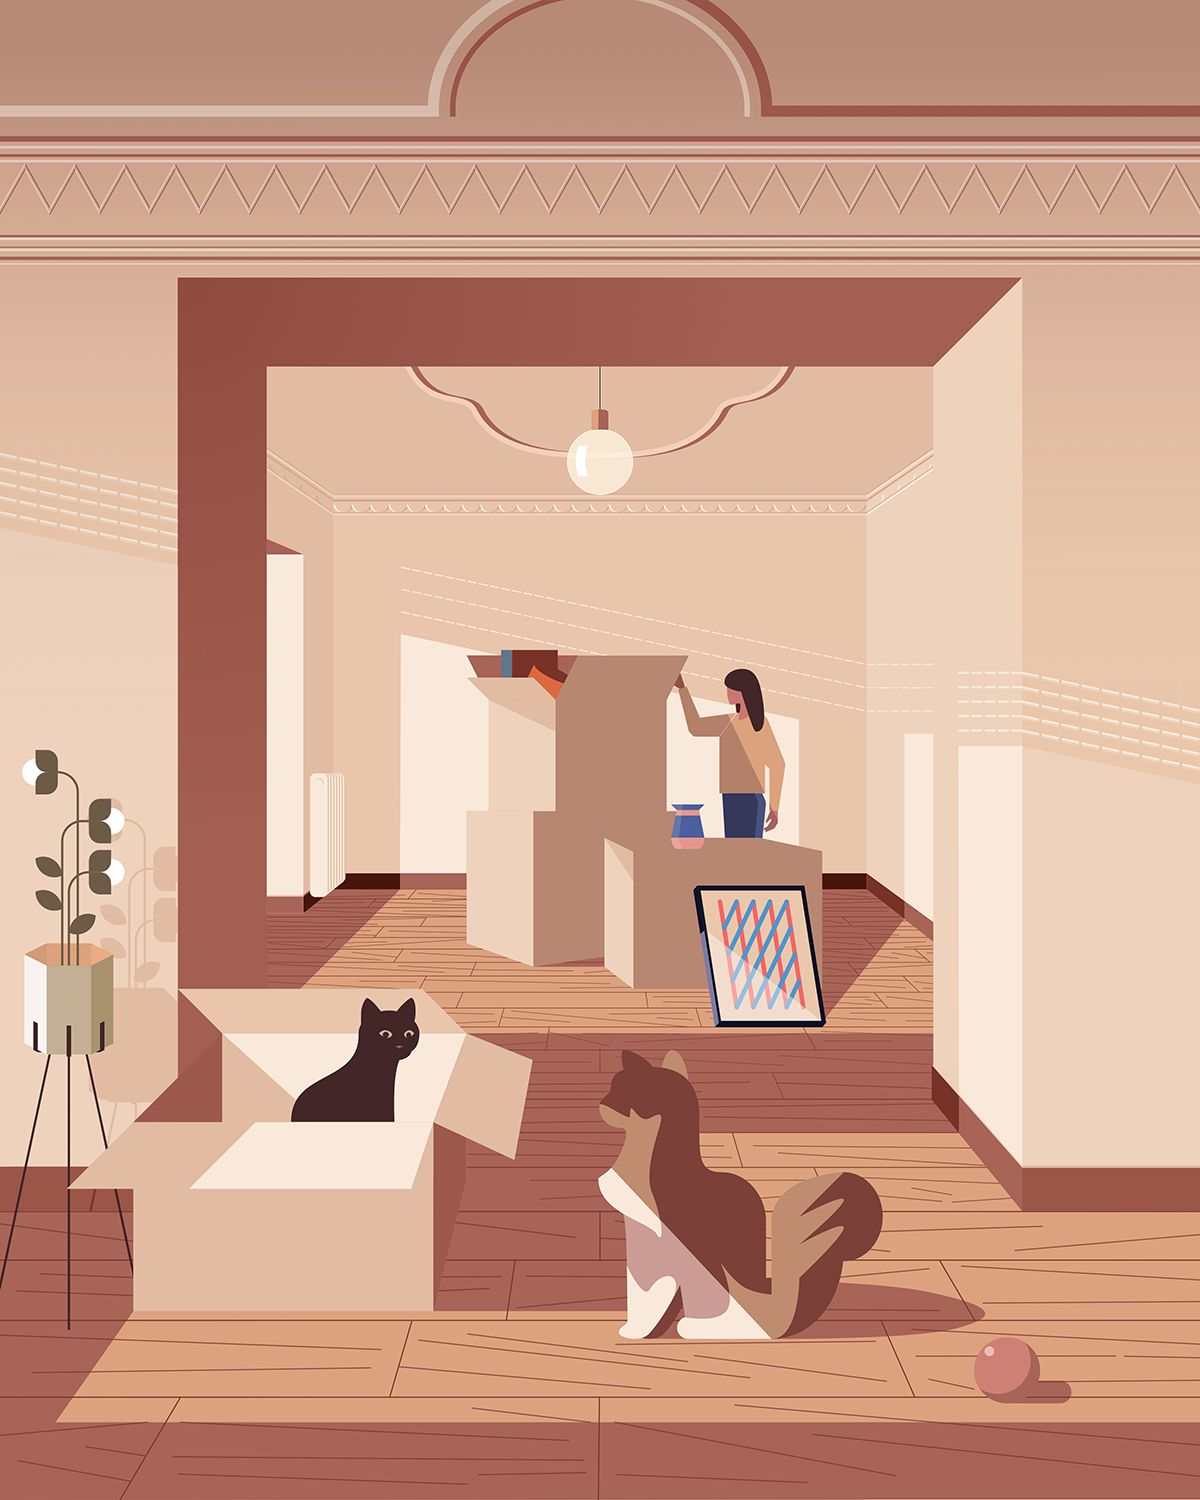 Illustration of cats in a room with a person unpacking a box